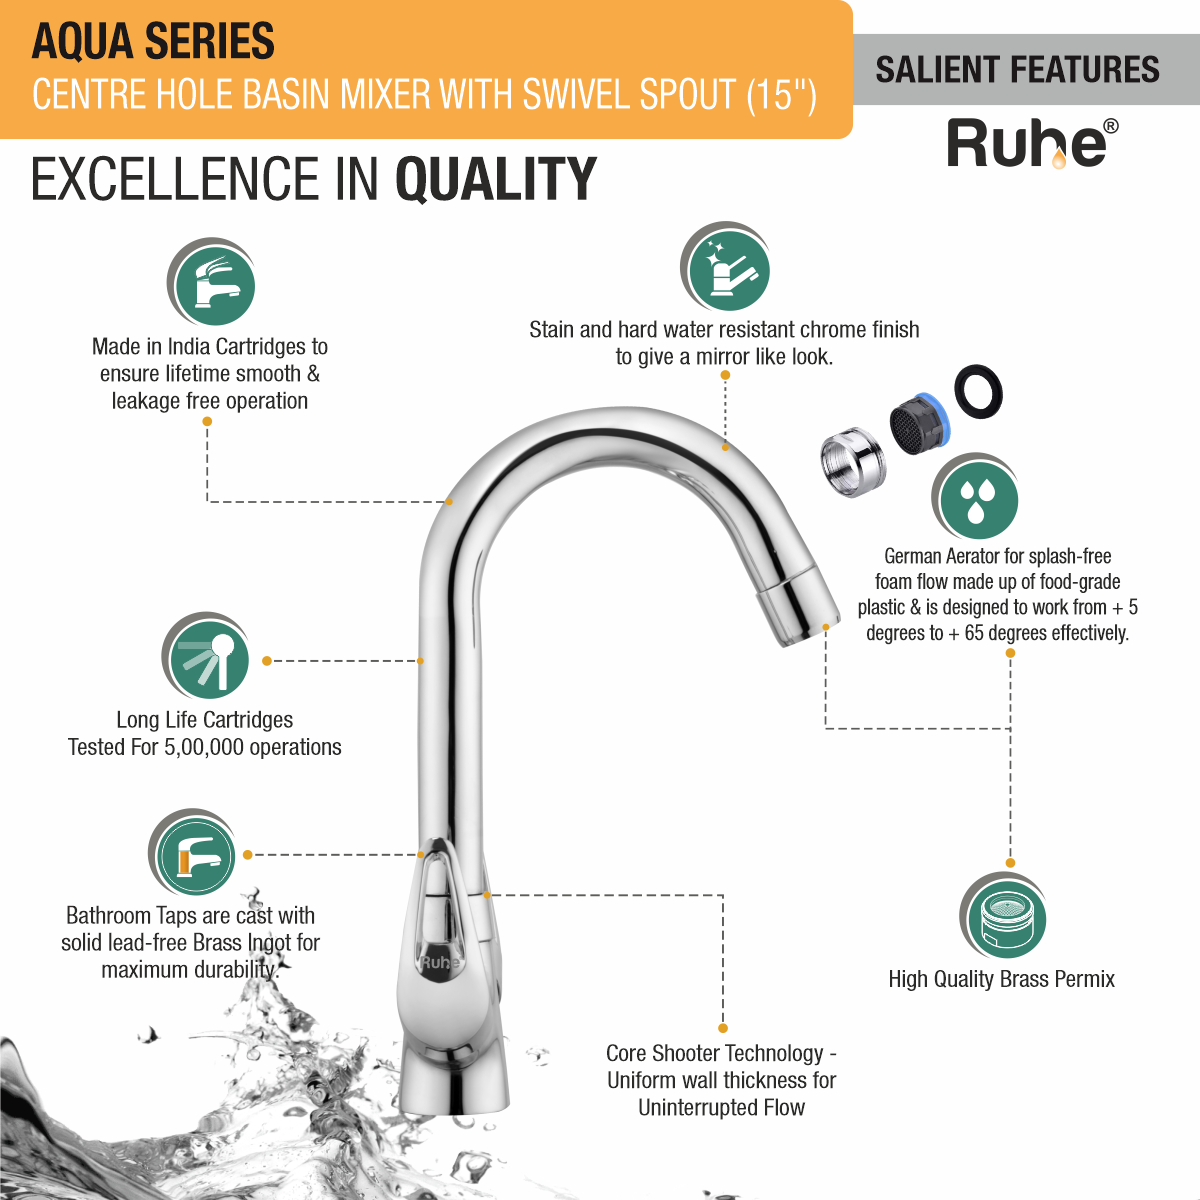 Aqua Centre Hole Basin Mixer with Medium (15 inches) Round Swivel Spout Faucet features and benefits